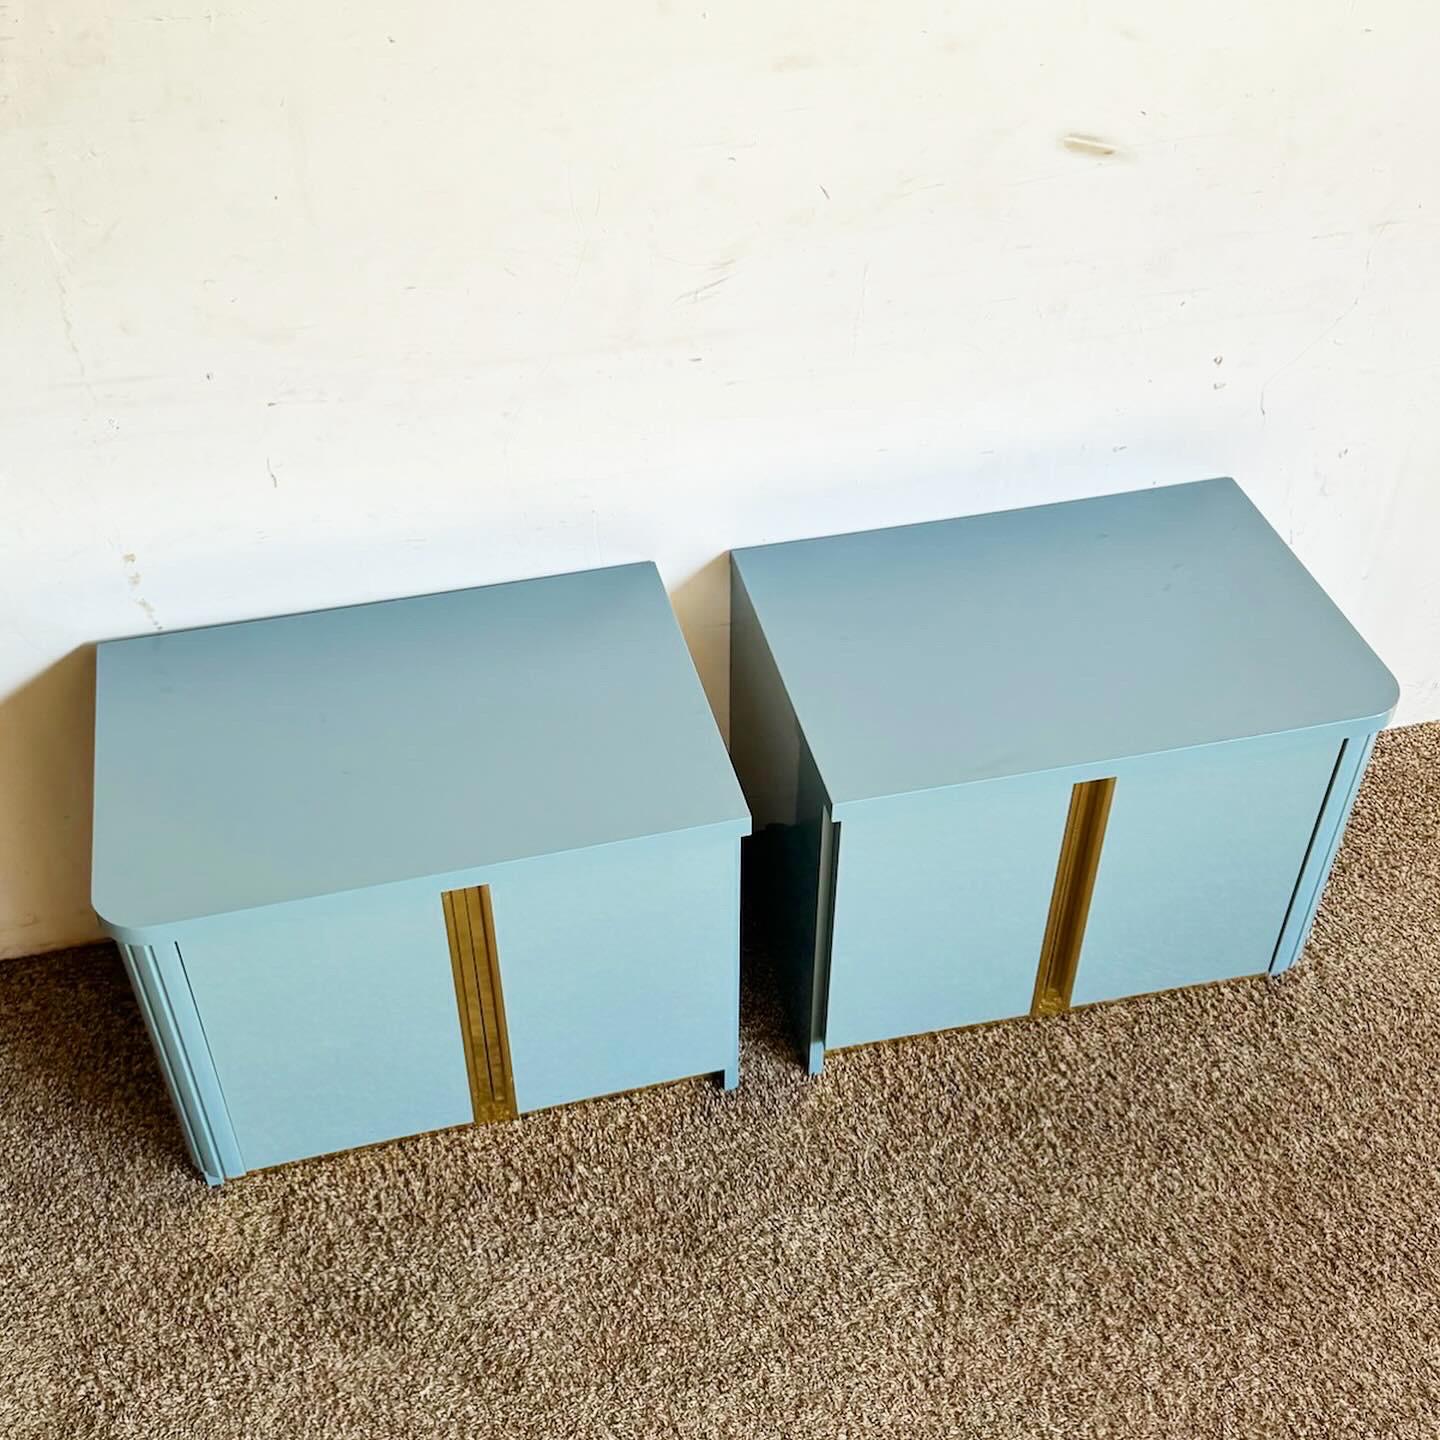 Italian Postmodern Baby Blue Lacquered Nightstands With Gold Accents – a Pair For Sale 5